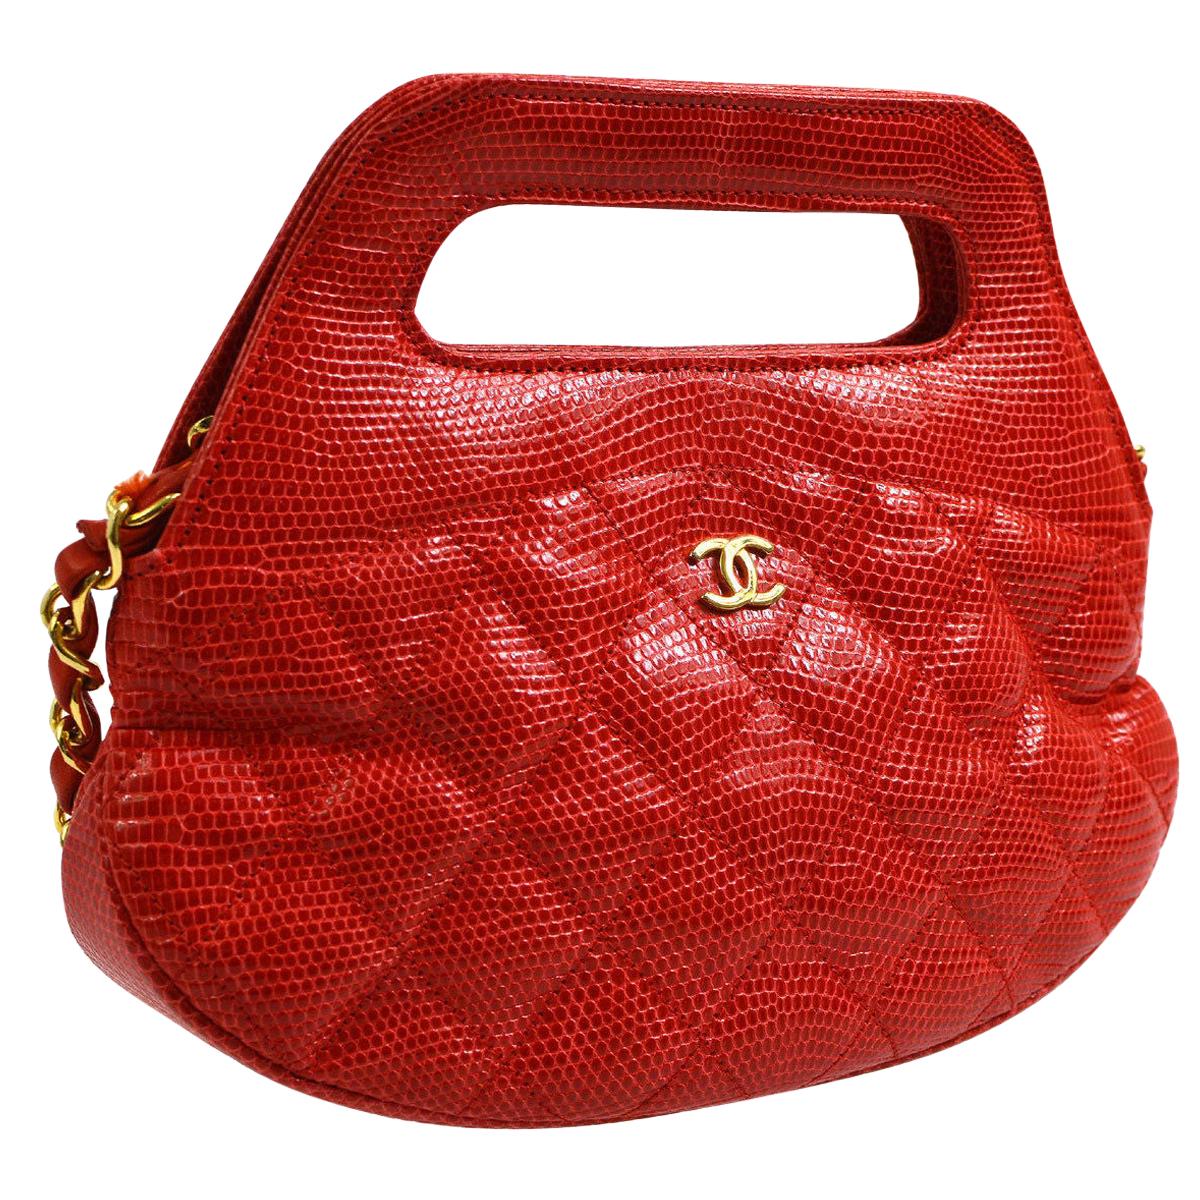 Chanel Red Lizard Exotic Small Mini 2 in 1 Top Handle Satchel Shoulder Bag W/Box